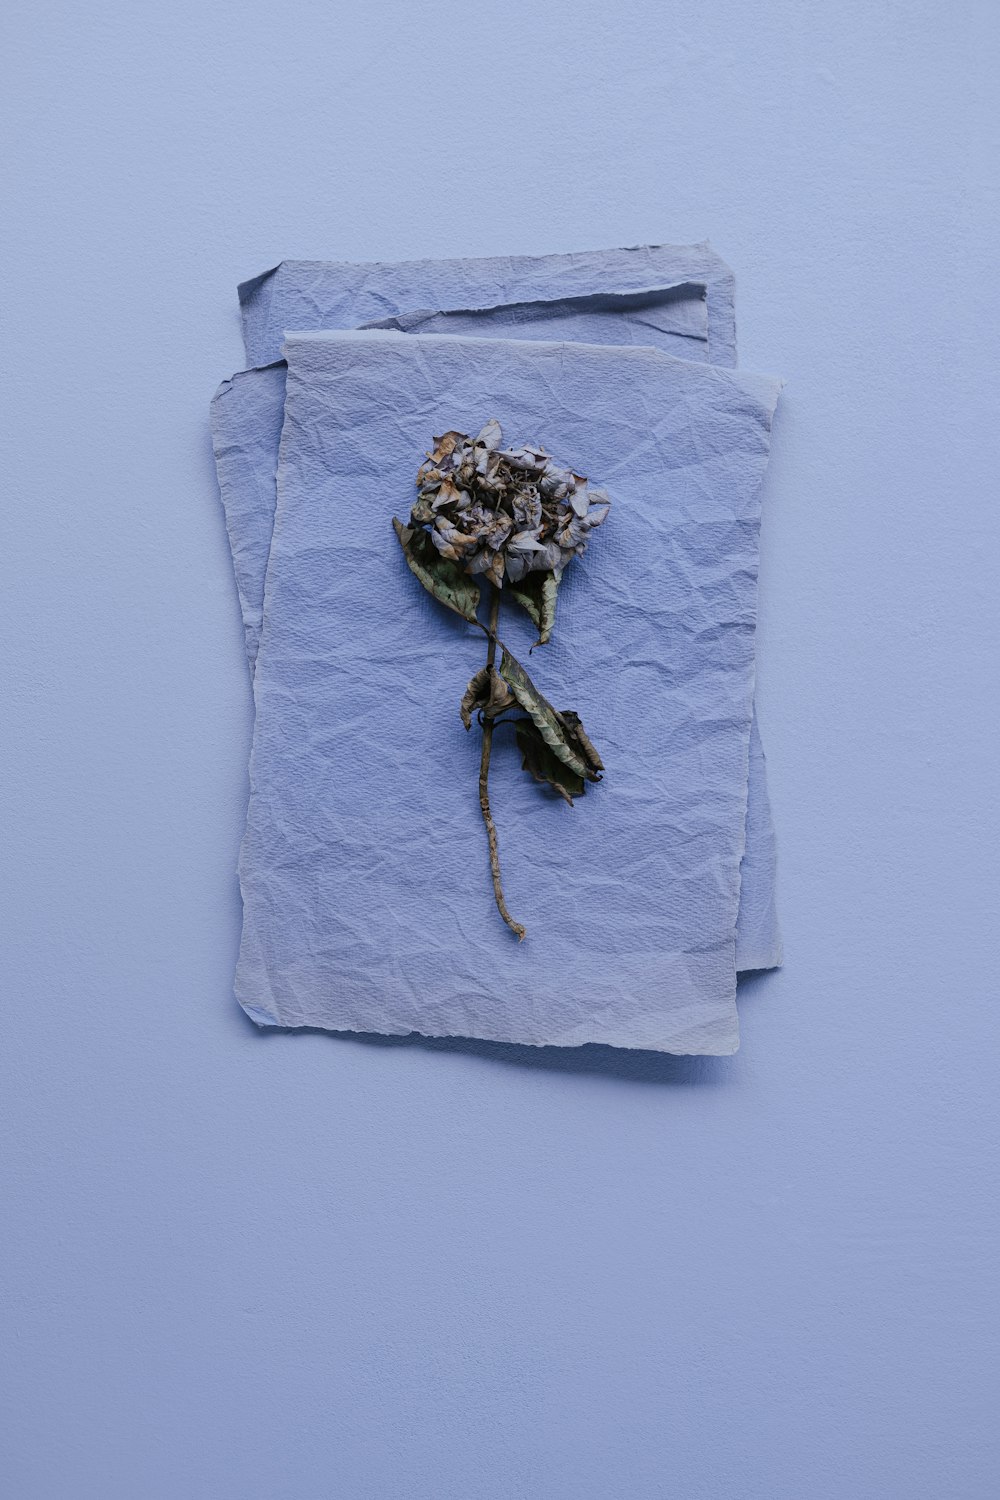 a piece of paper with a dried flower on it